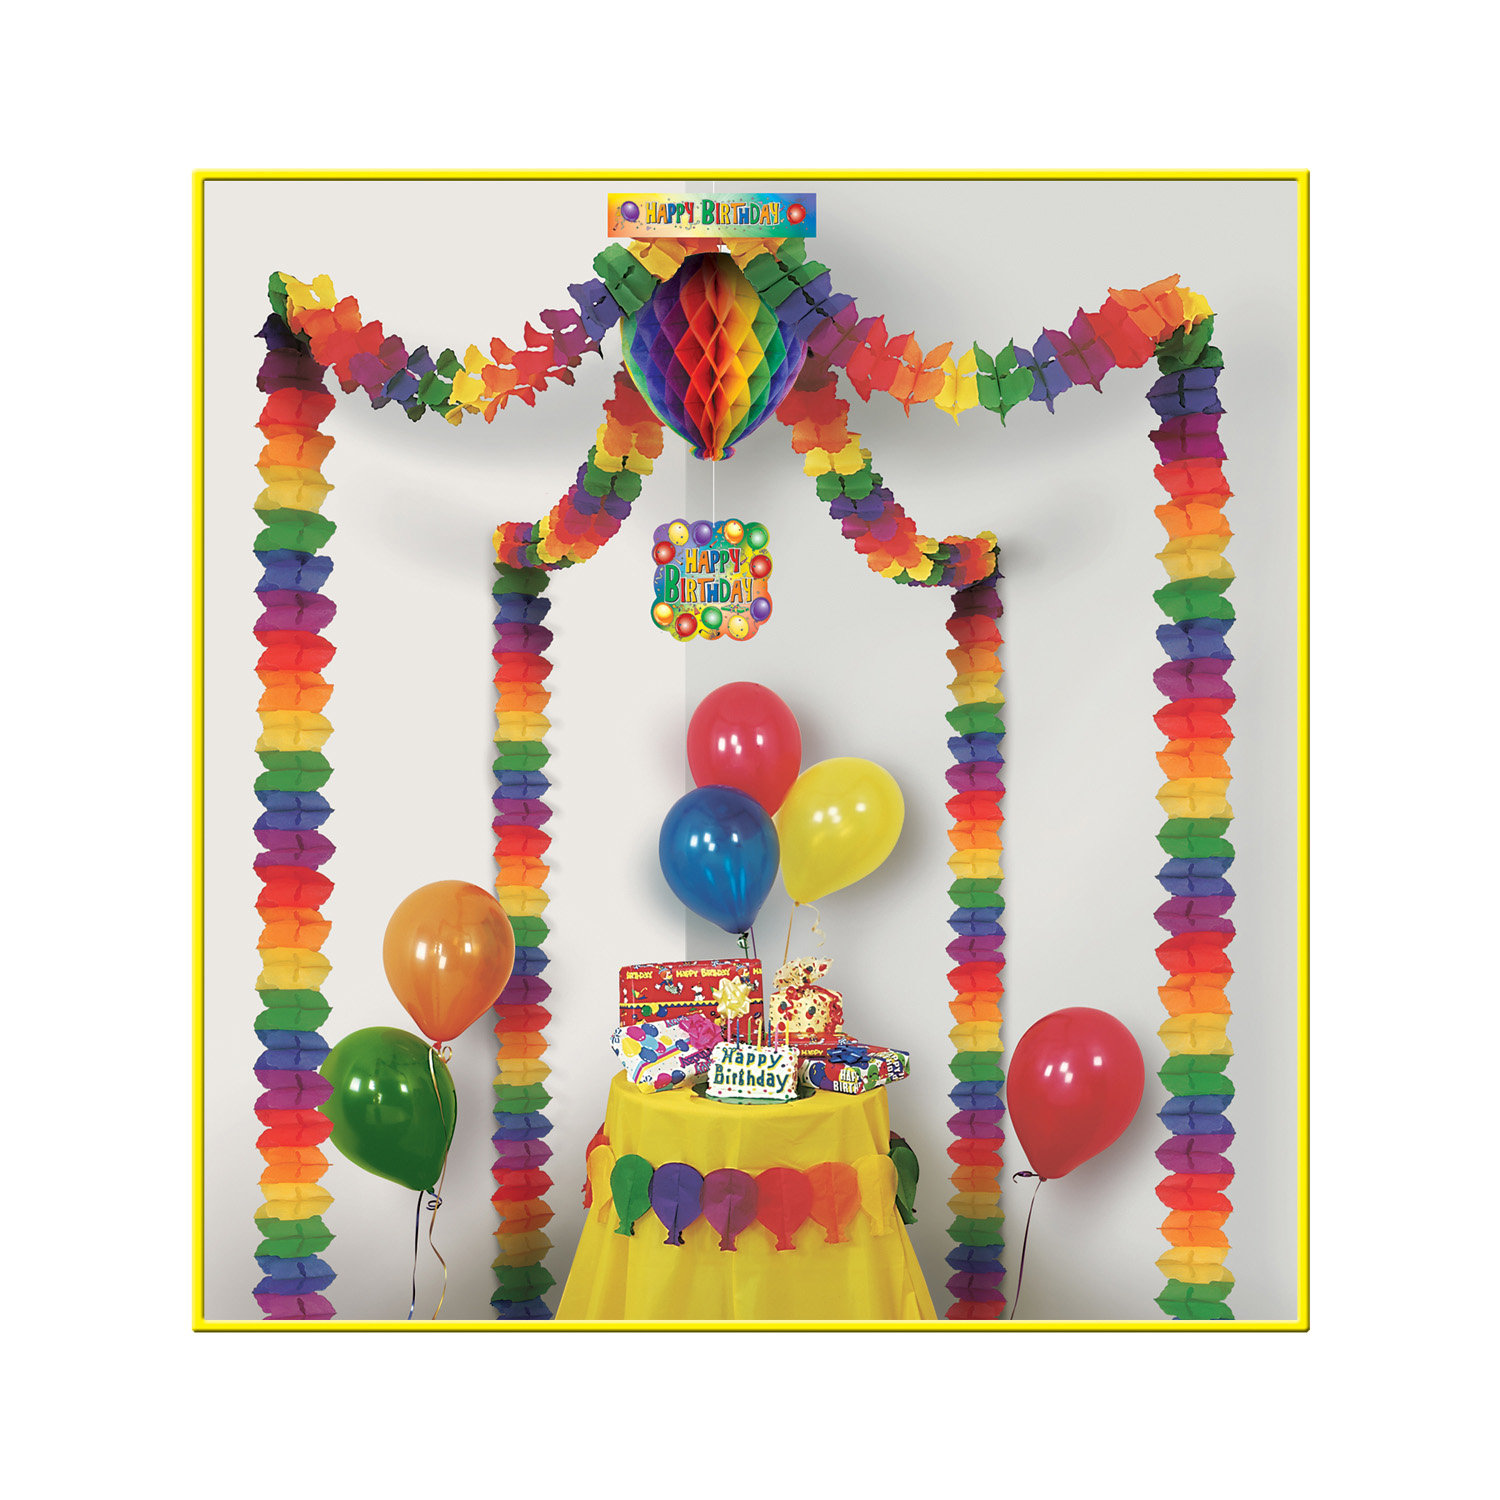 AMSCAN Wall Decoration Party Wall Pictures Birthday Roch and Roll 673100 